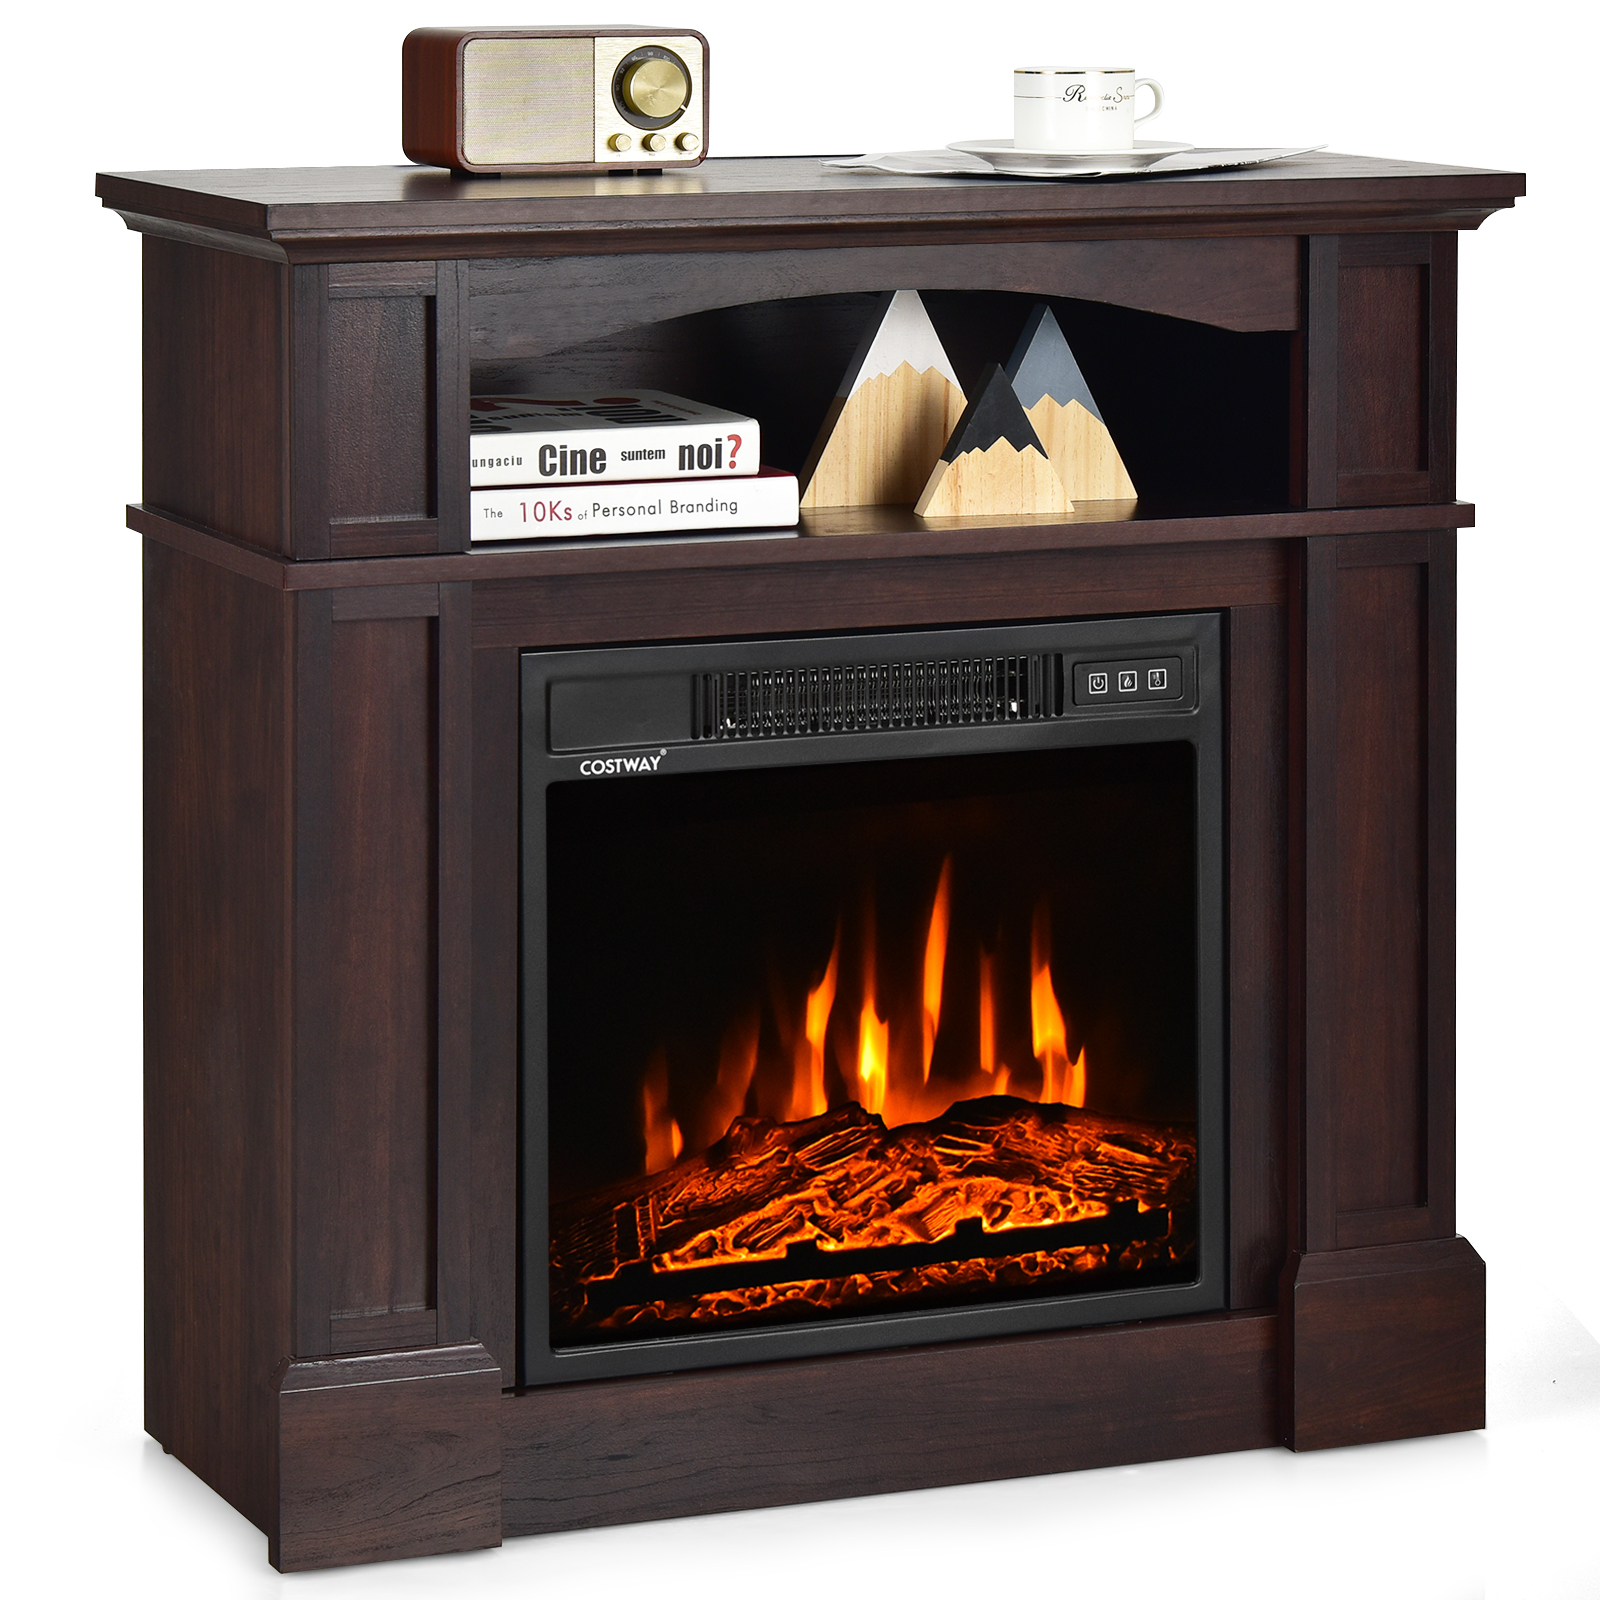 Topbuy 32" Electric Fireplace with Mantel 1400W Freestanding Heater with Remote Control & Adjustable Brightness Brown